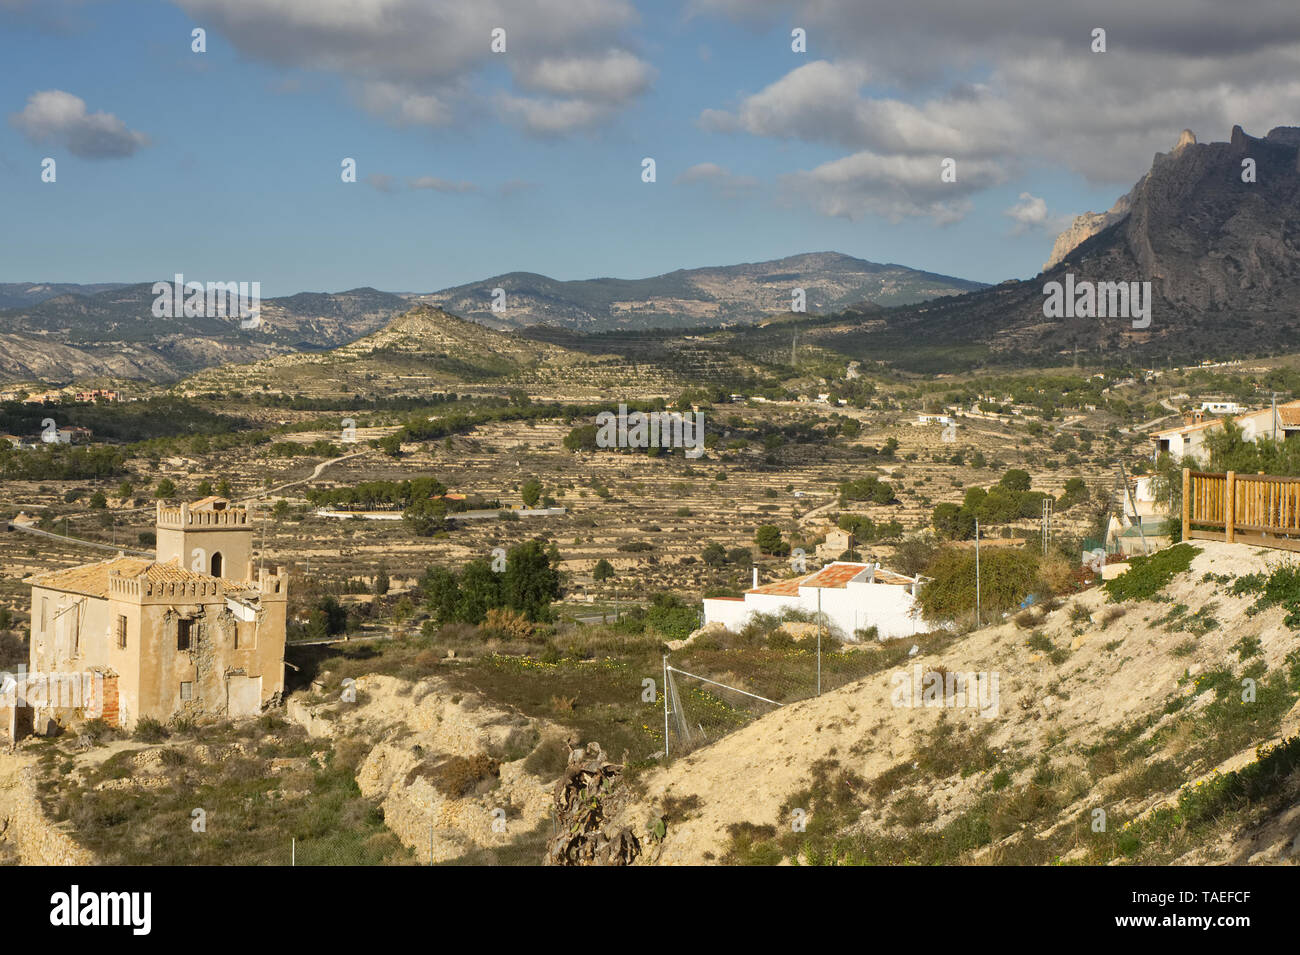 View over Countryside at Busot near Alicante, Spain Stock Photo